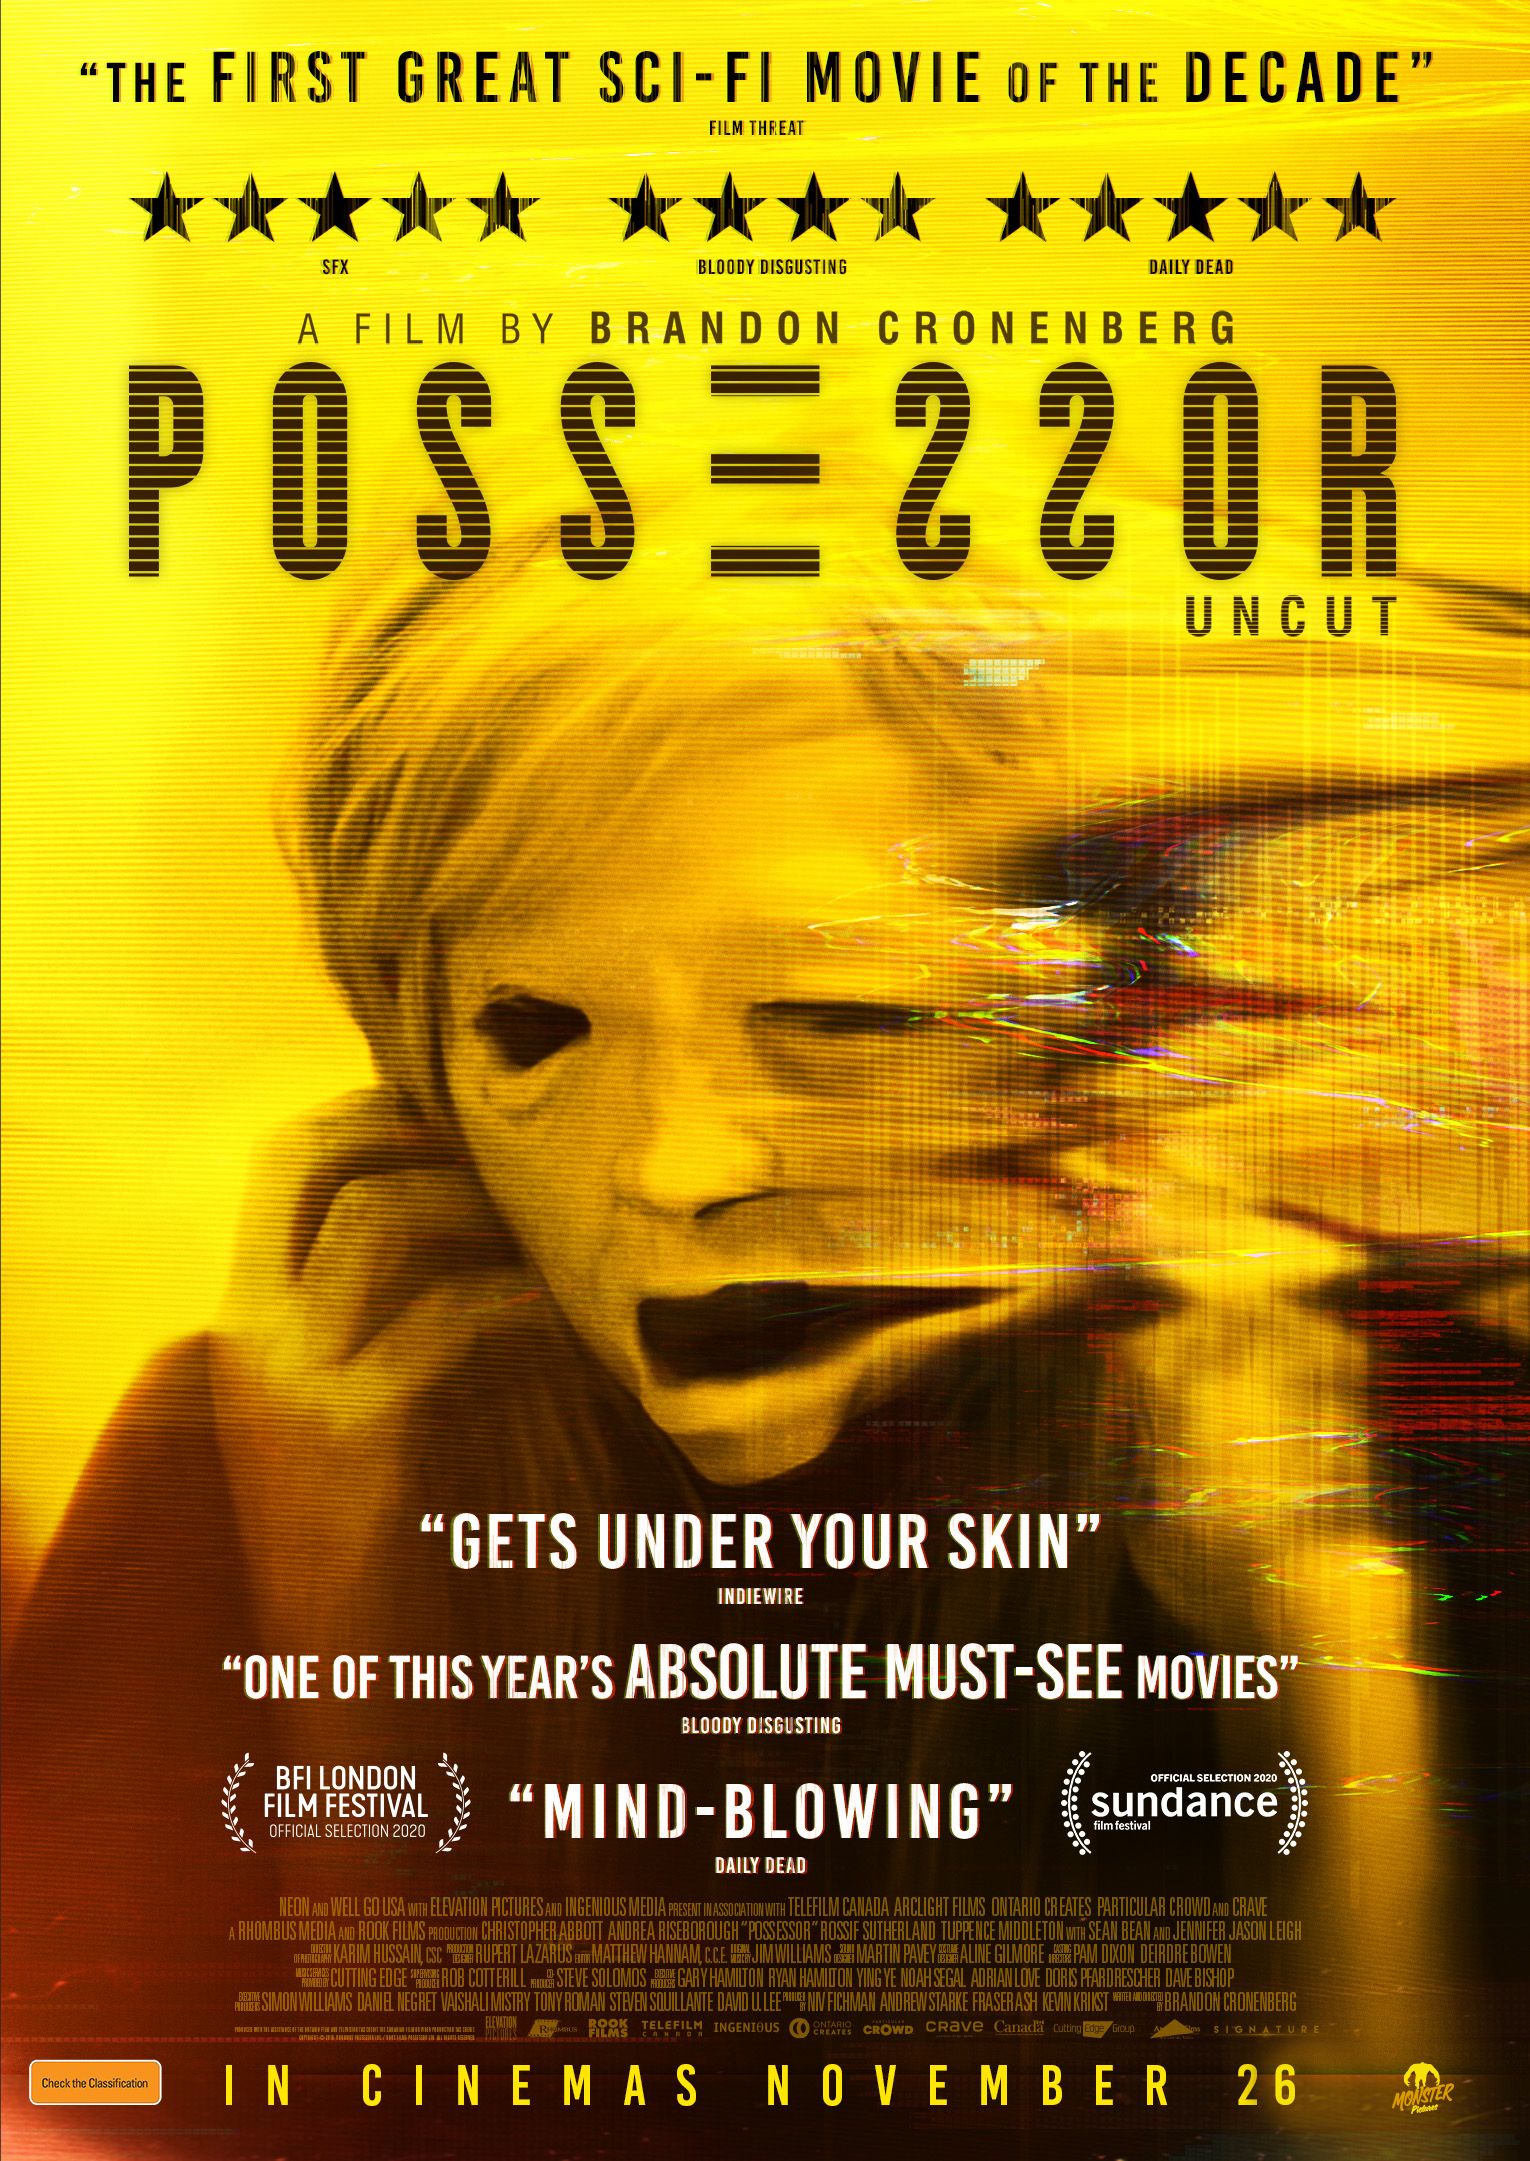 A warped human face on the Possessor 2020 Film Poster